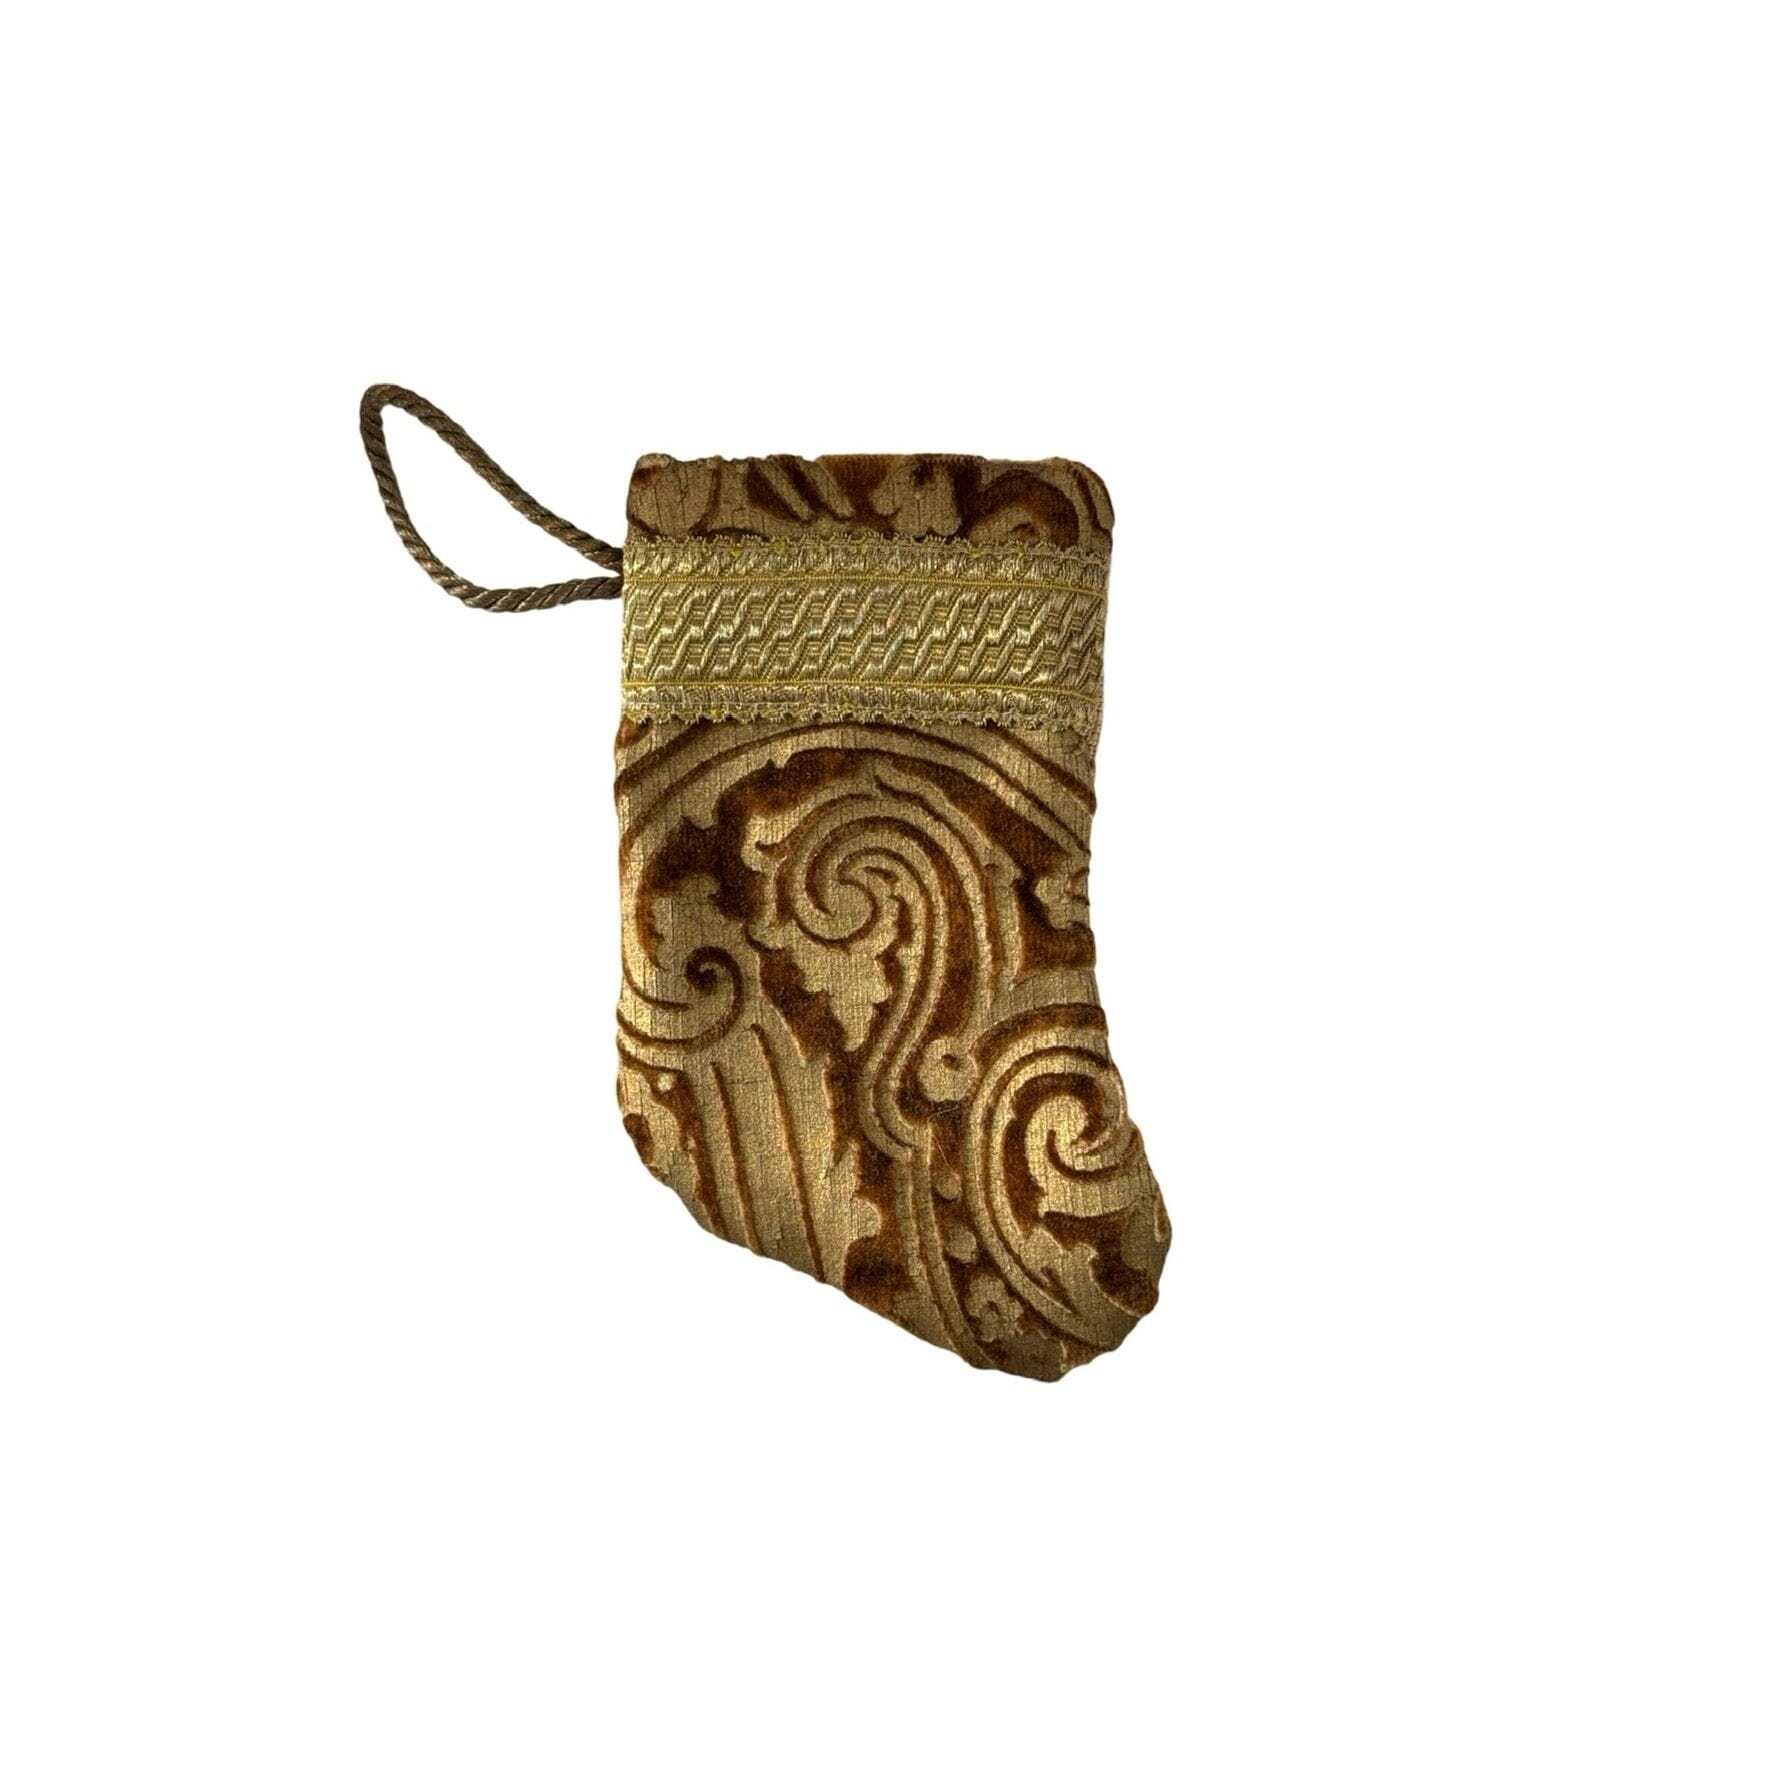 Handmade Mini Stocking Made From Vintage Fabric and Trims- Brown and Gold Ornament B. Viz Design F 